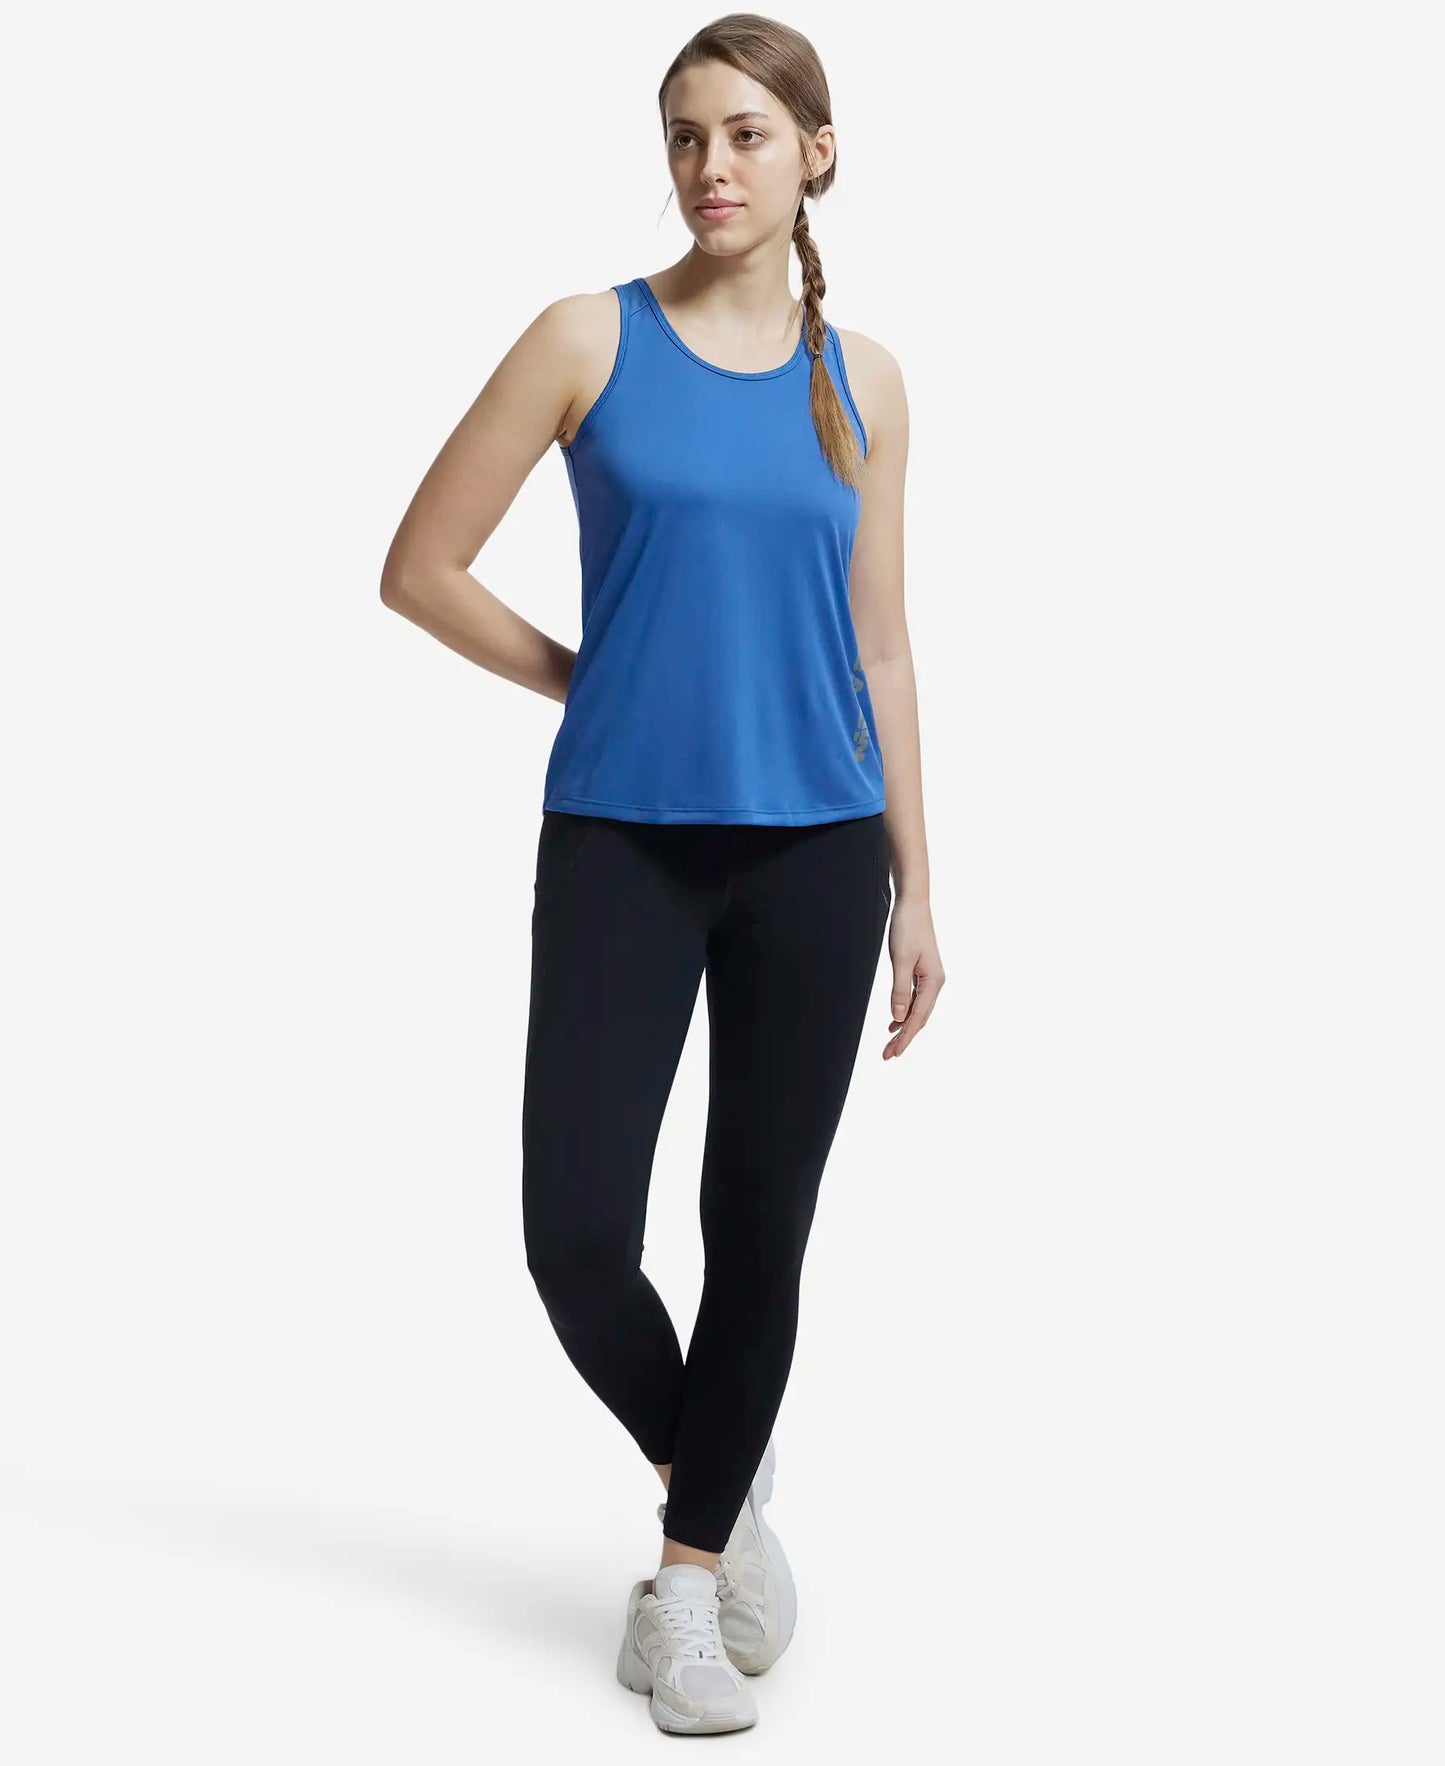 Microfiber Fabric Graphic Printed Tank Top With Breathable Mesh - Bright Cobalt-4